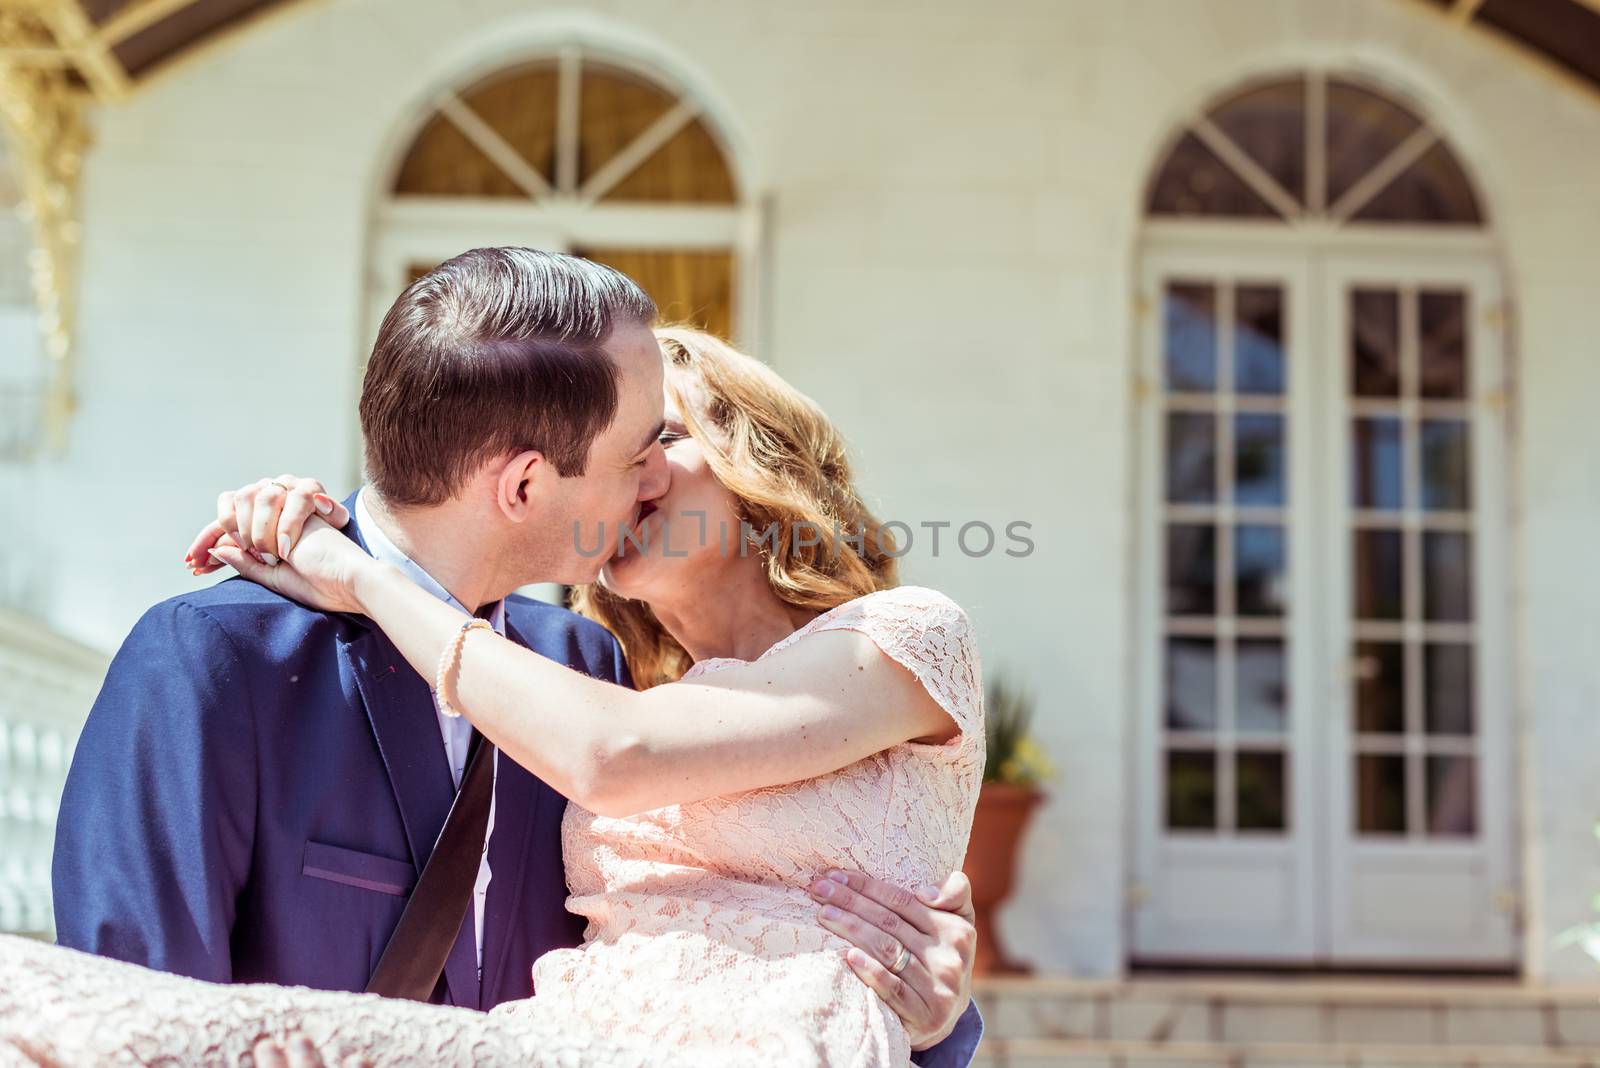 Groom holding bride in his arms and kissing after the ceremony at the registry office in Lviv, Ukraine